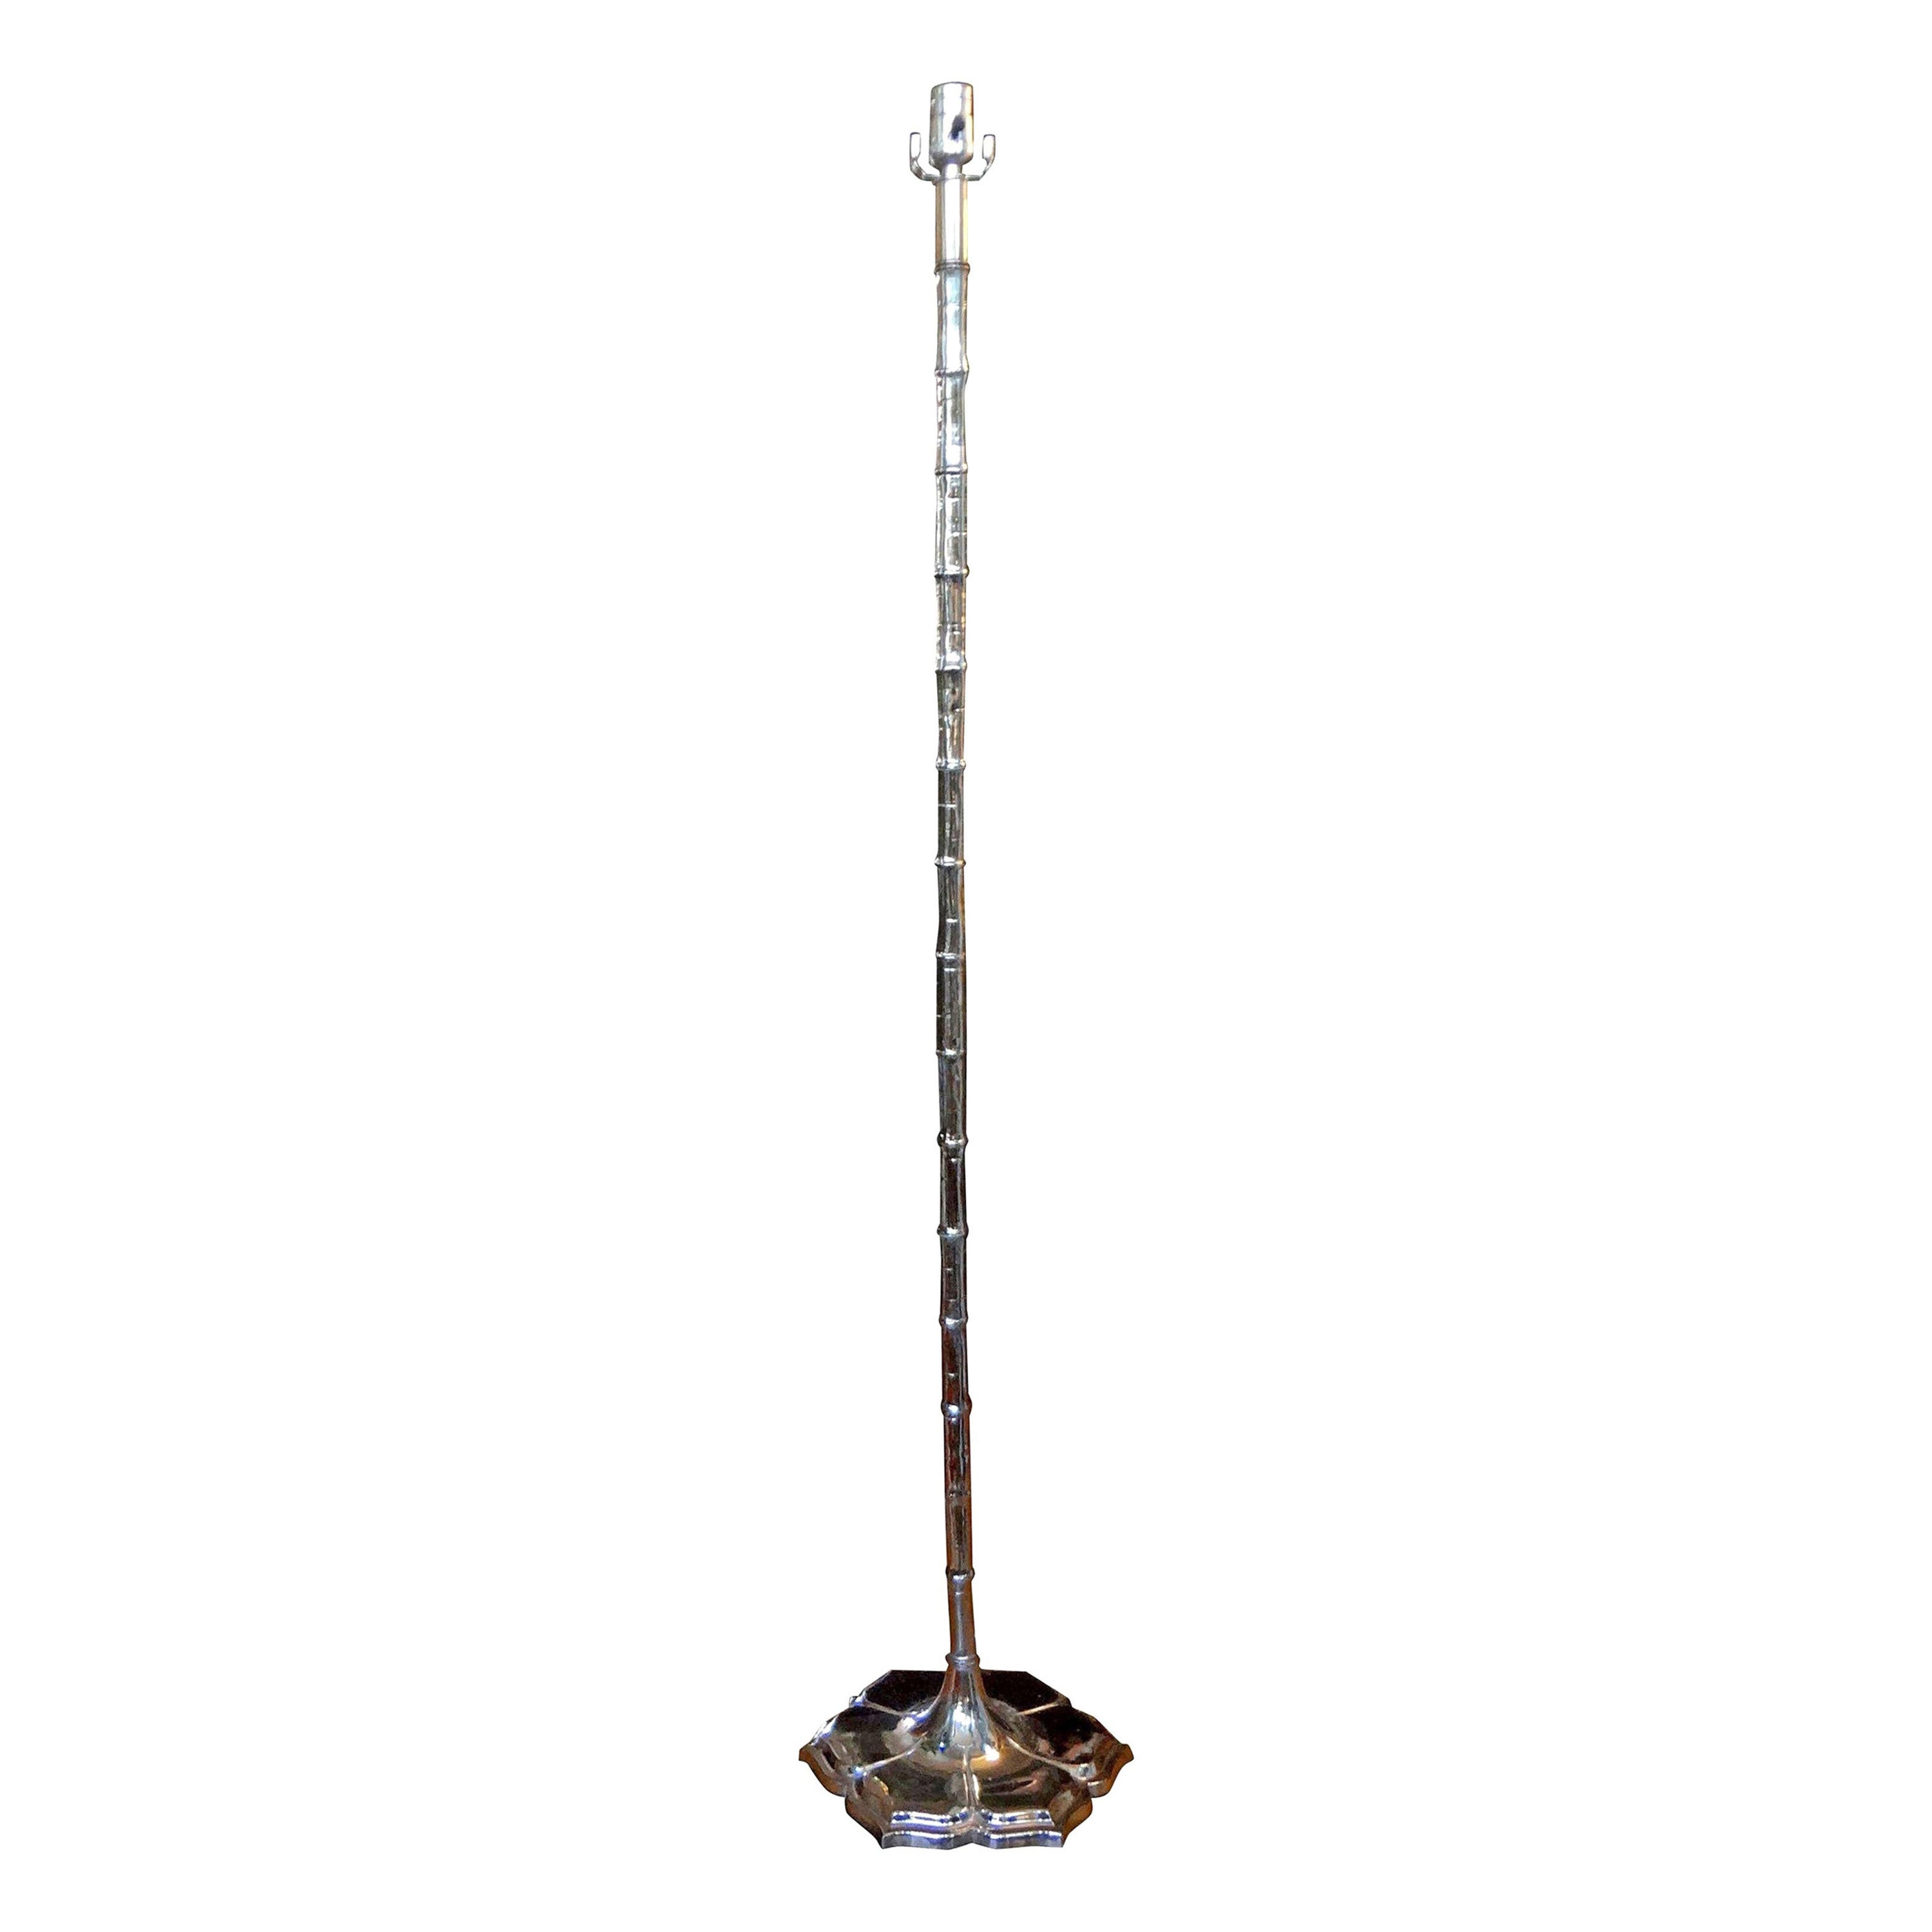 Midcentury Chrome Faux Bamboo Lotus Stehlampe